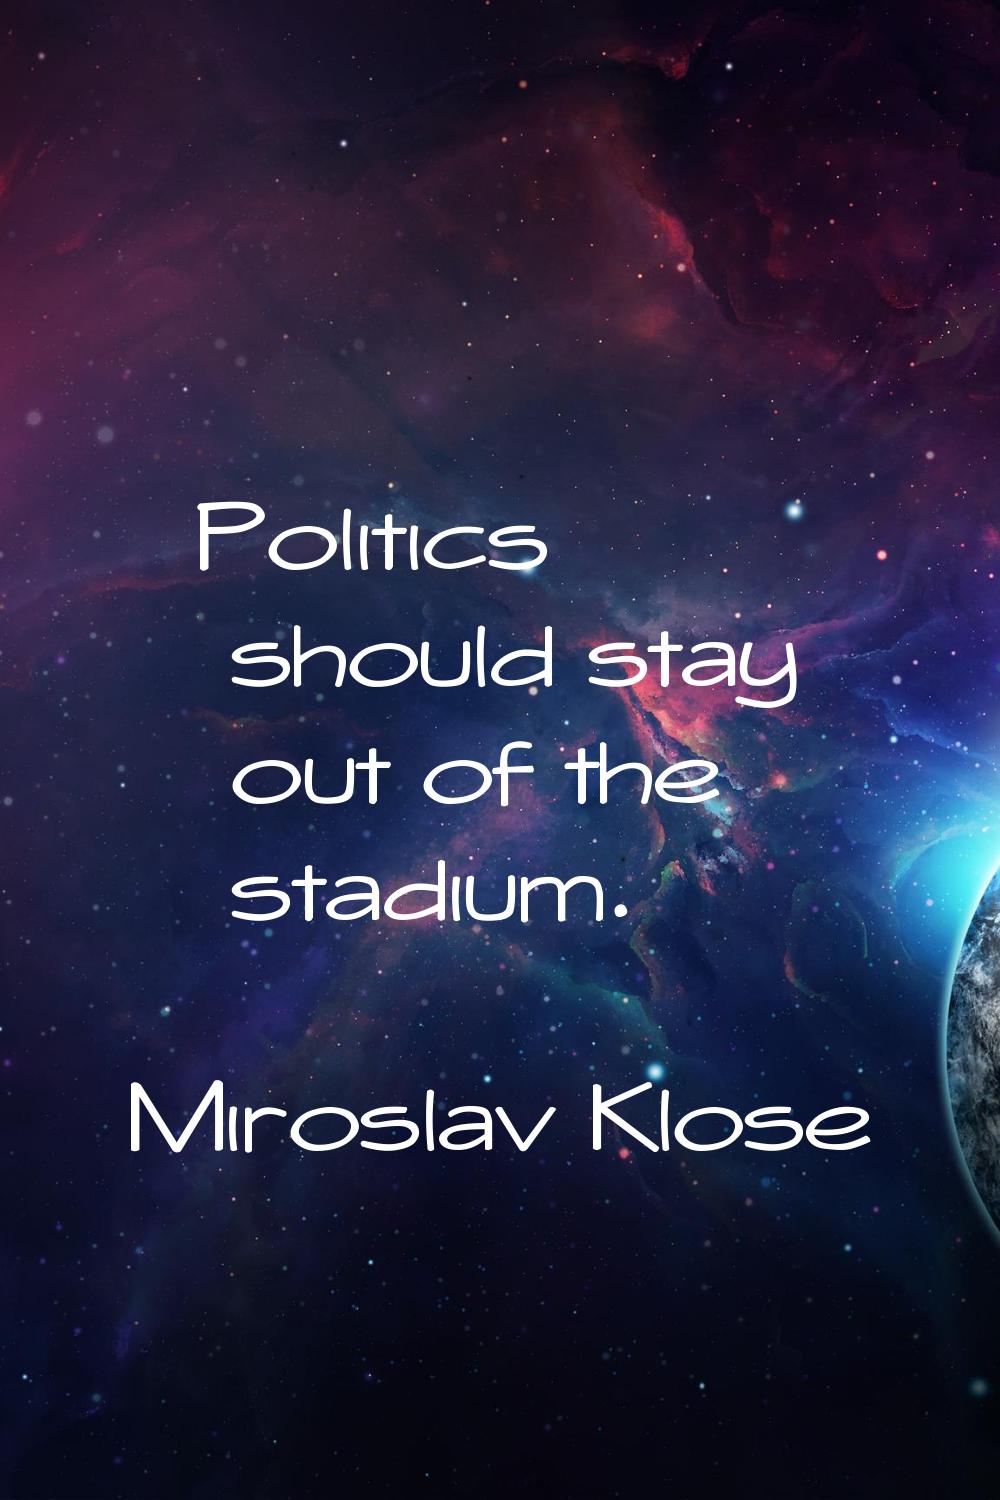 Politics should stay out of the stadium.